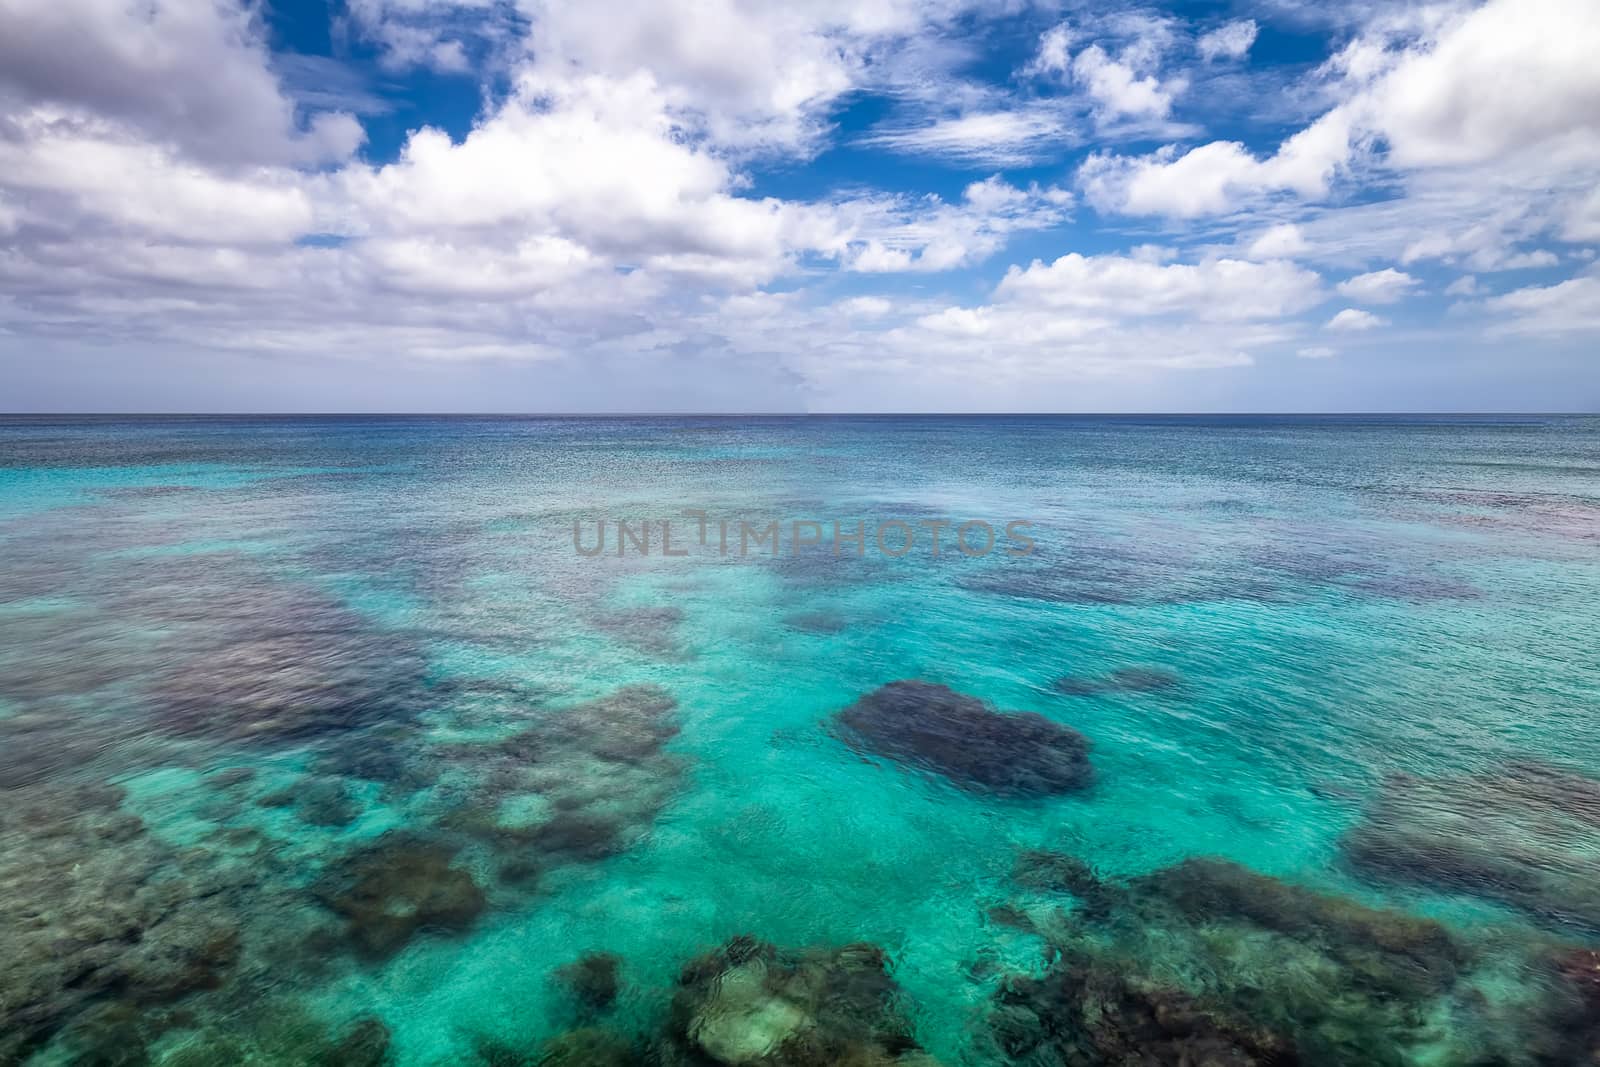 Shallow turquoise waters with coral reefs. Tropics by DamantisZ